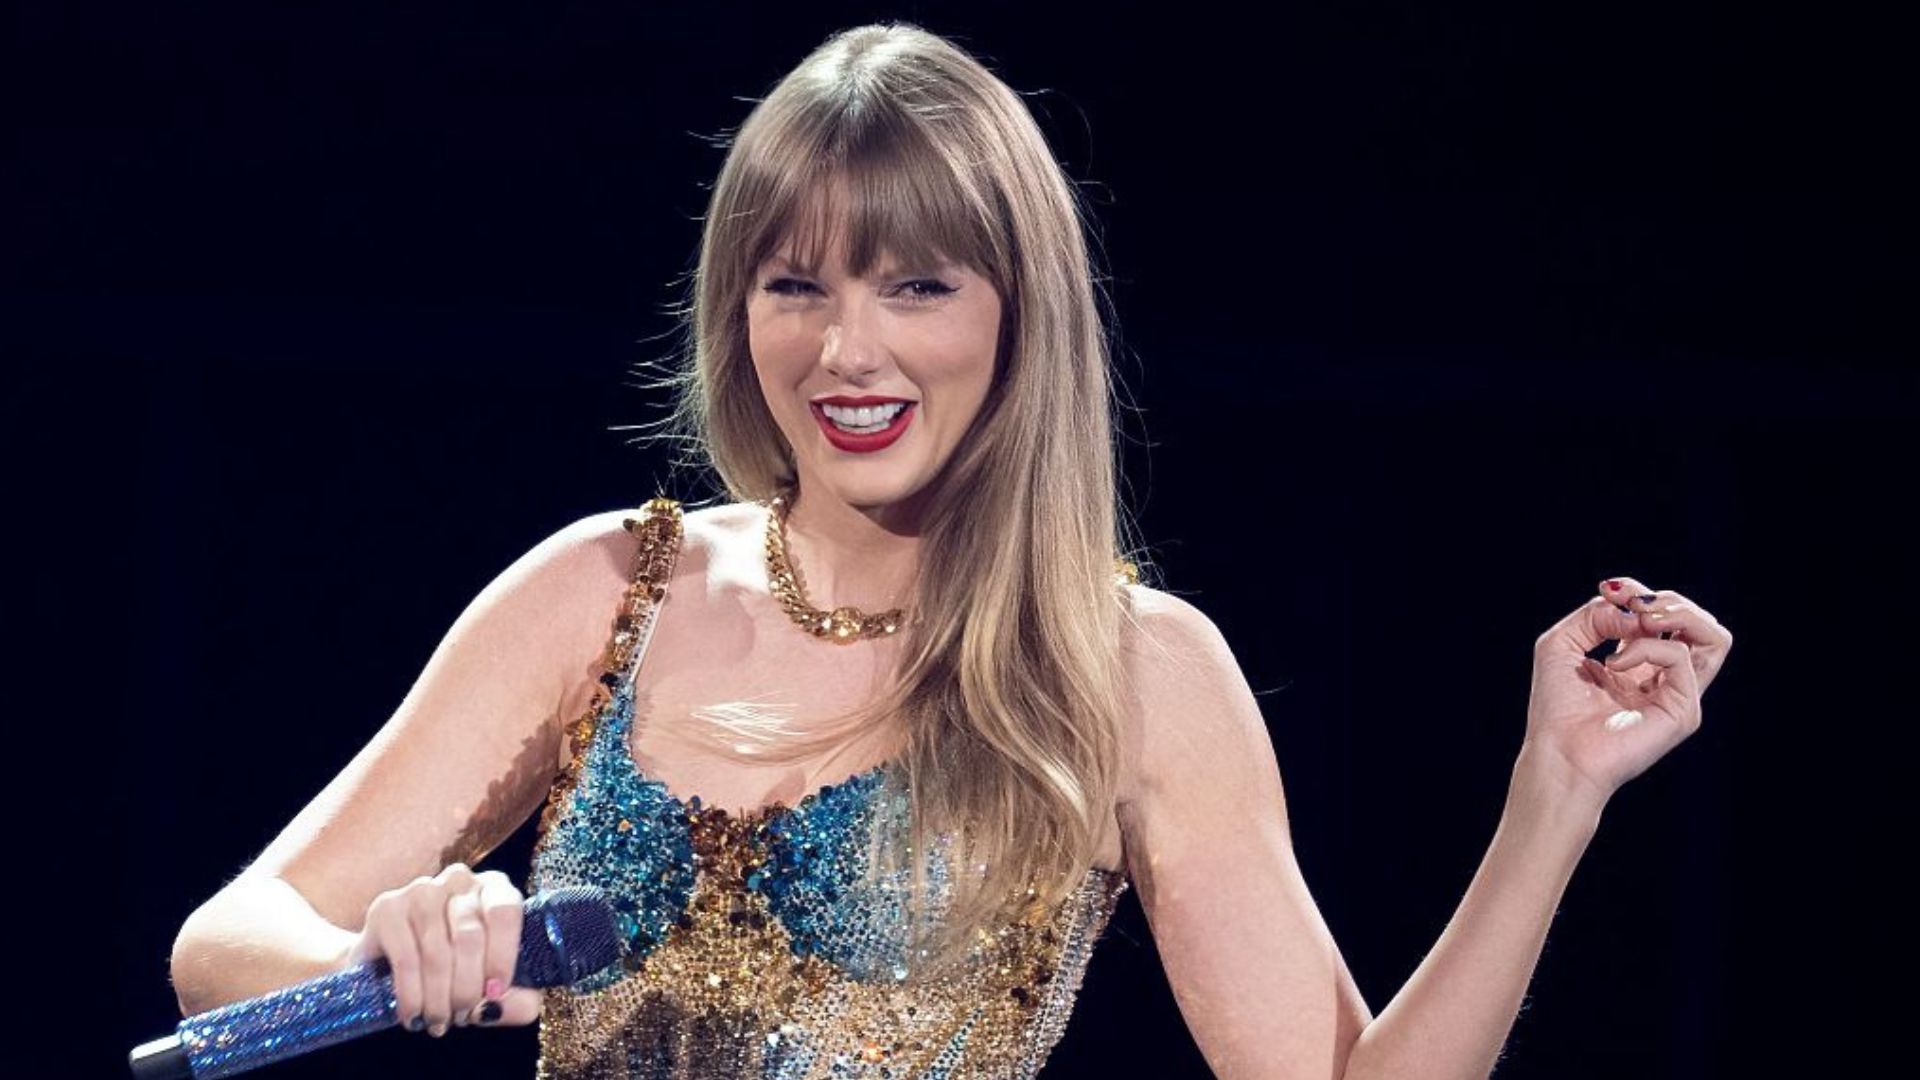 Are top tier performers like Taylor Swift helping drive inflation? /CFP